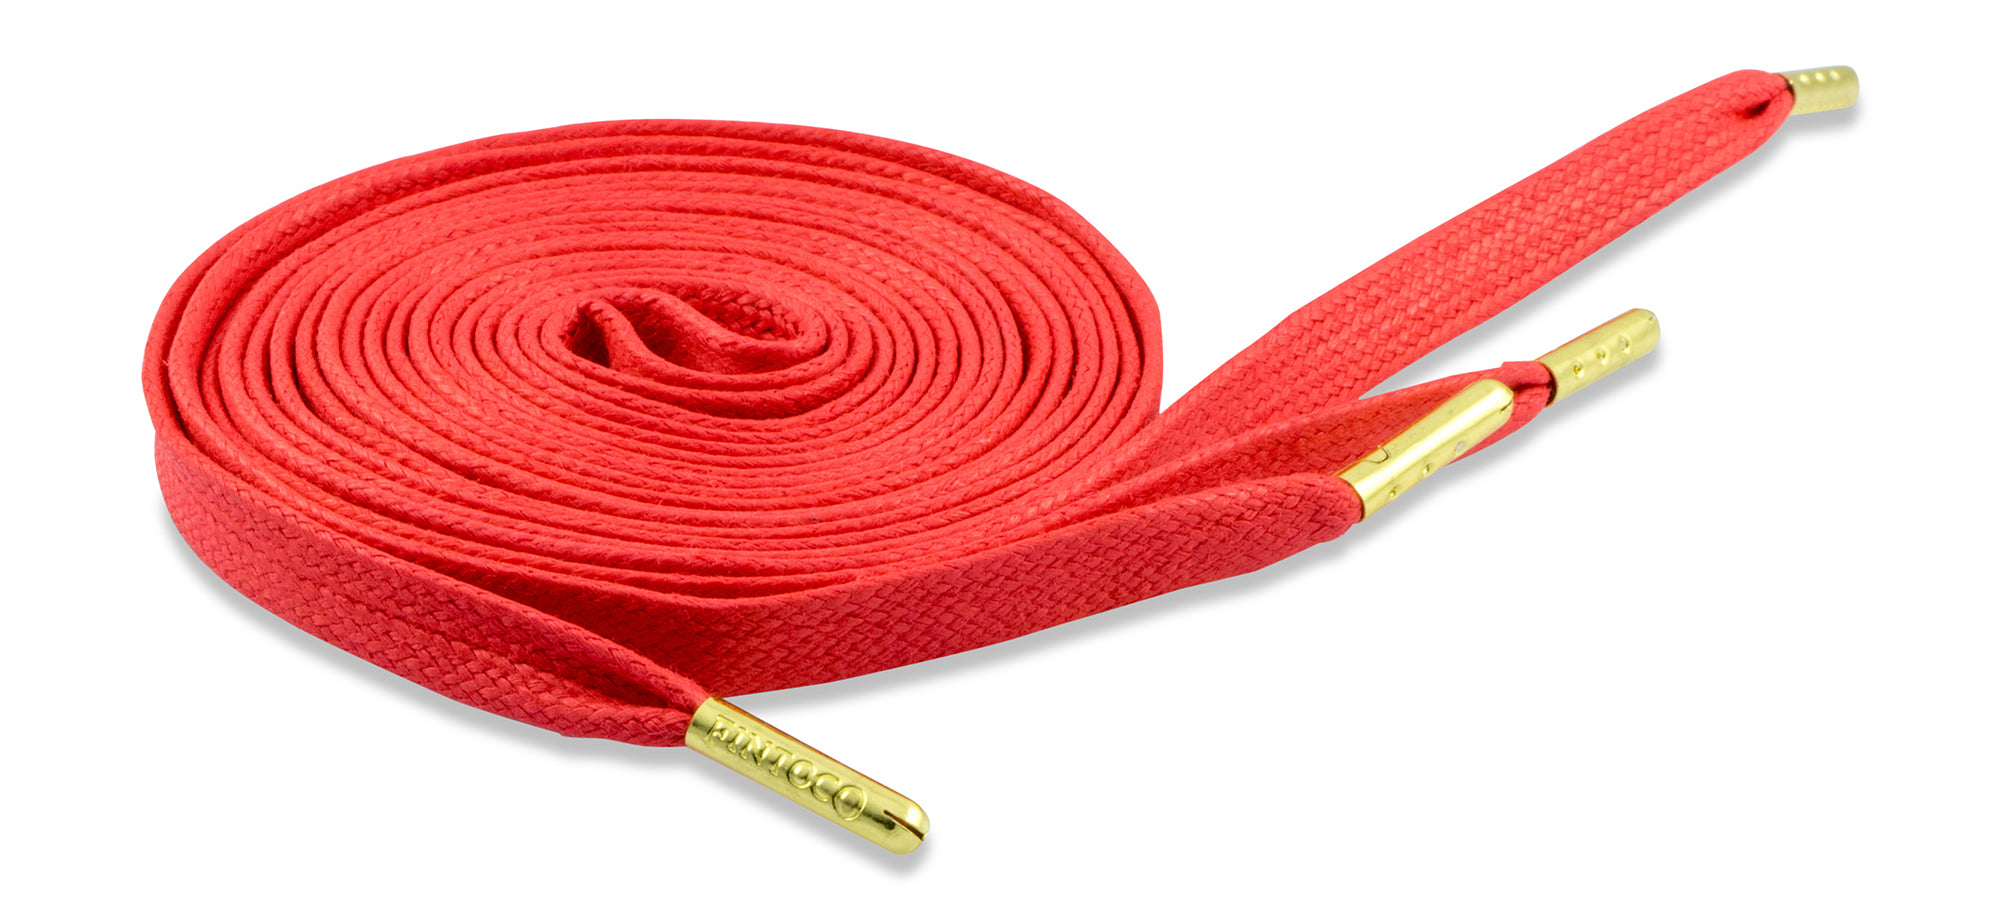 Flat Waxed Athletic Shoelaces - Red with Gold Tips